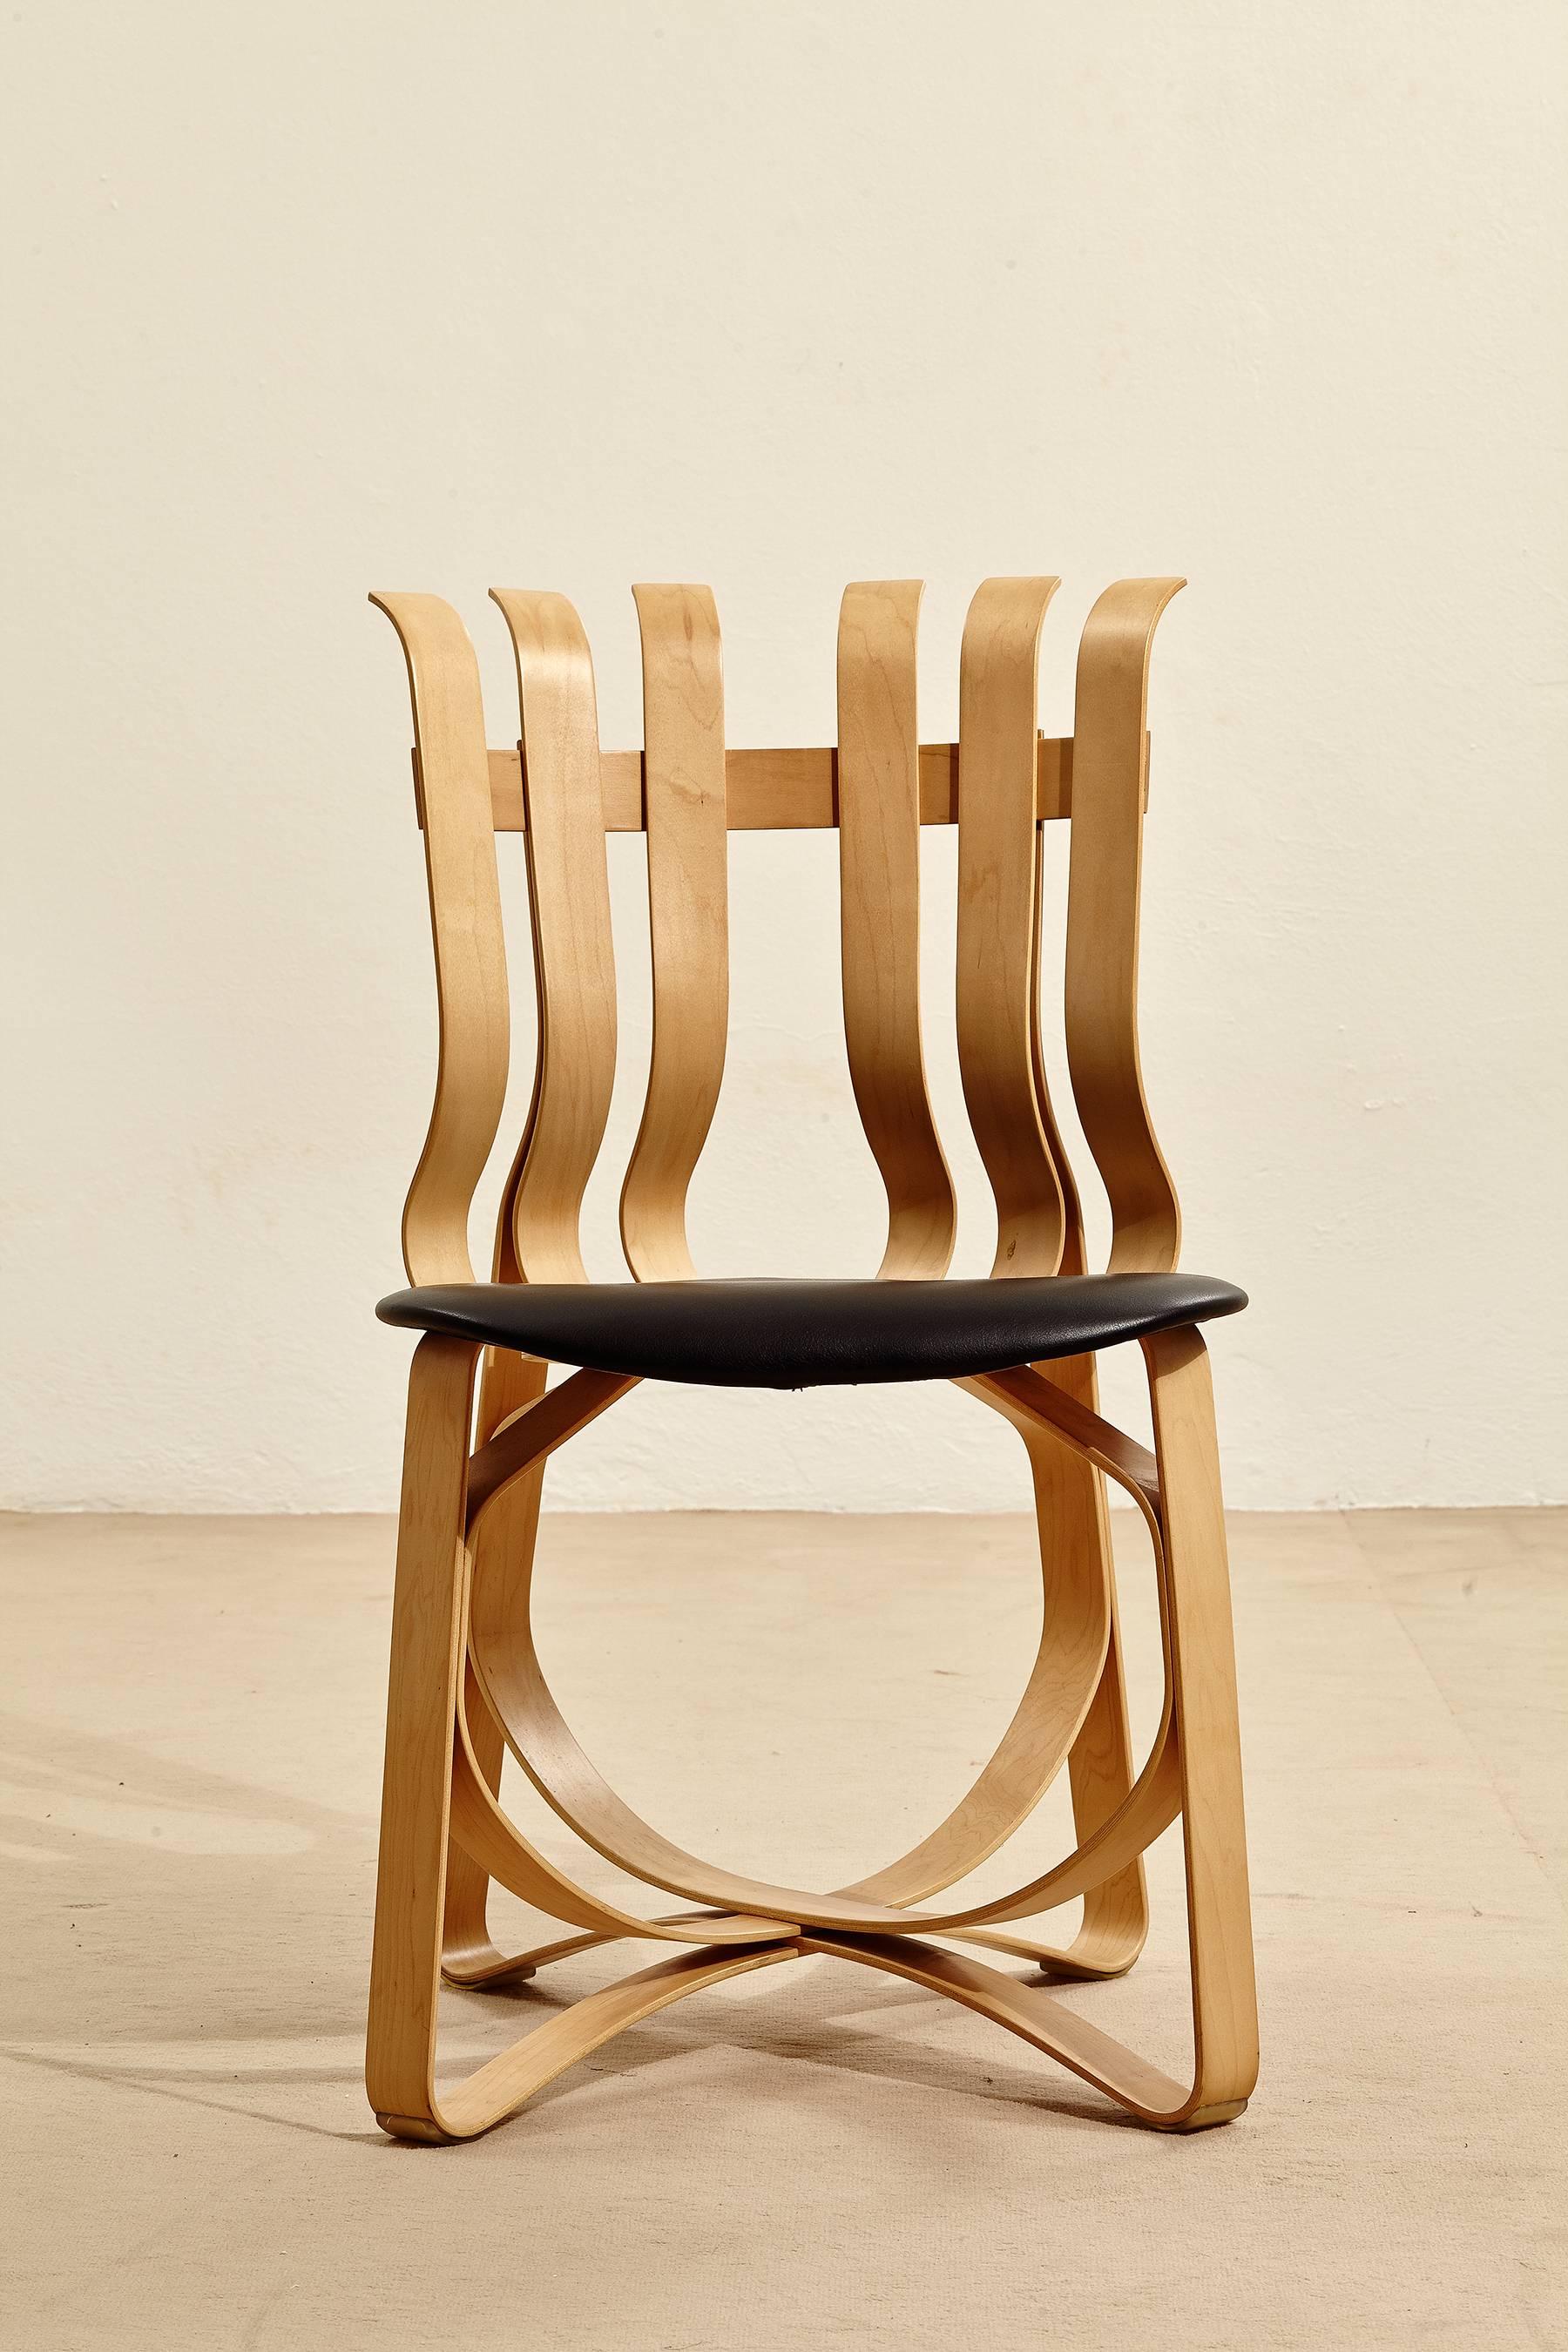 This is an early production of the hat trick chair designed by Frank O. Gehry for Knoll in 1990. The chair is in bent pale maple wood with black leather upholstered seat and is a great example of the architect's sculptural, organic approach to